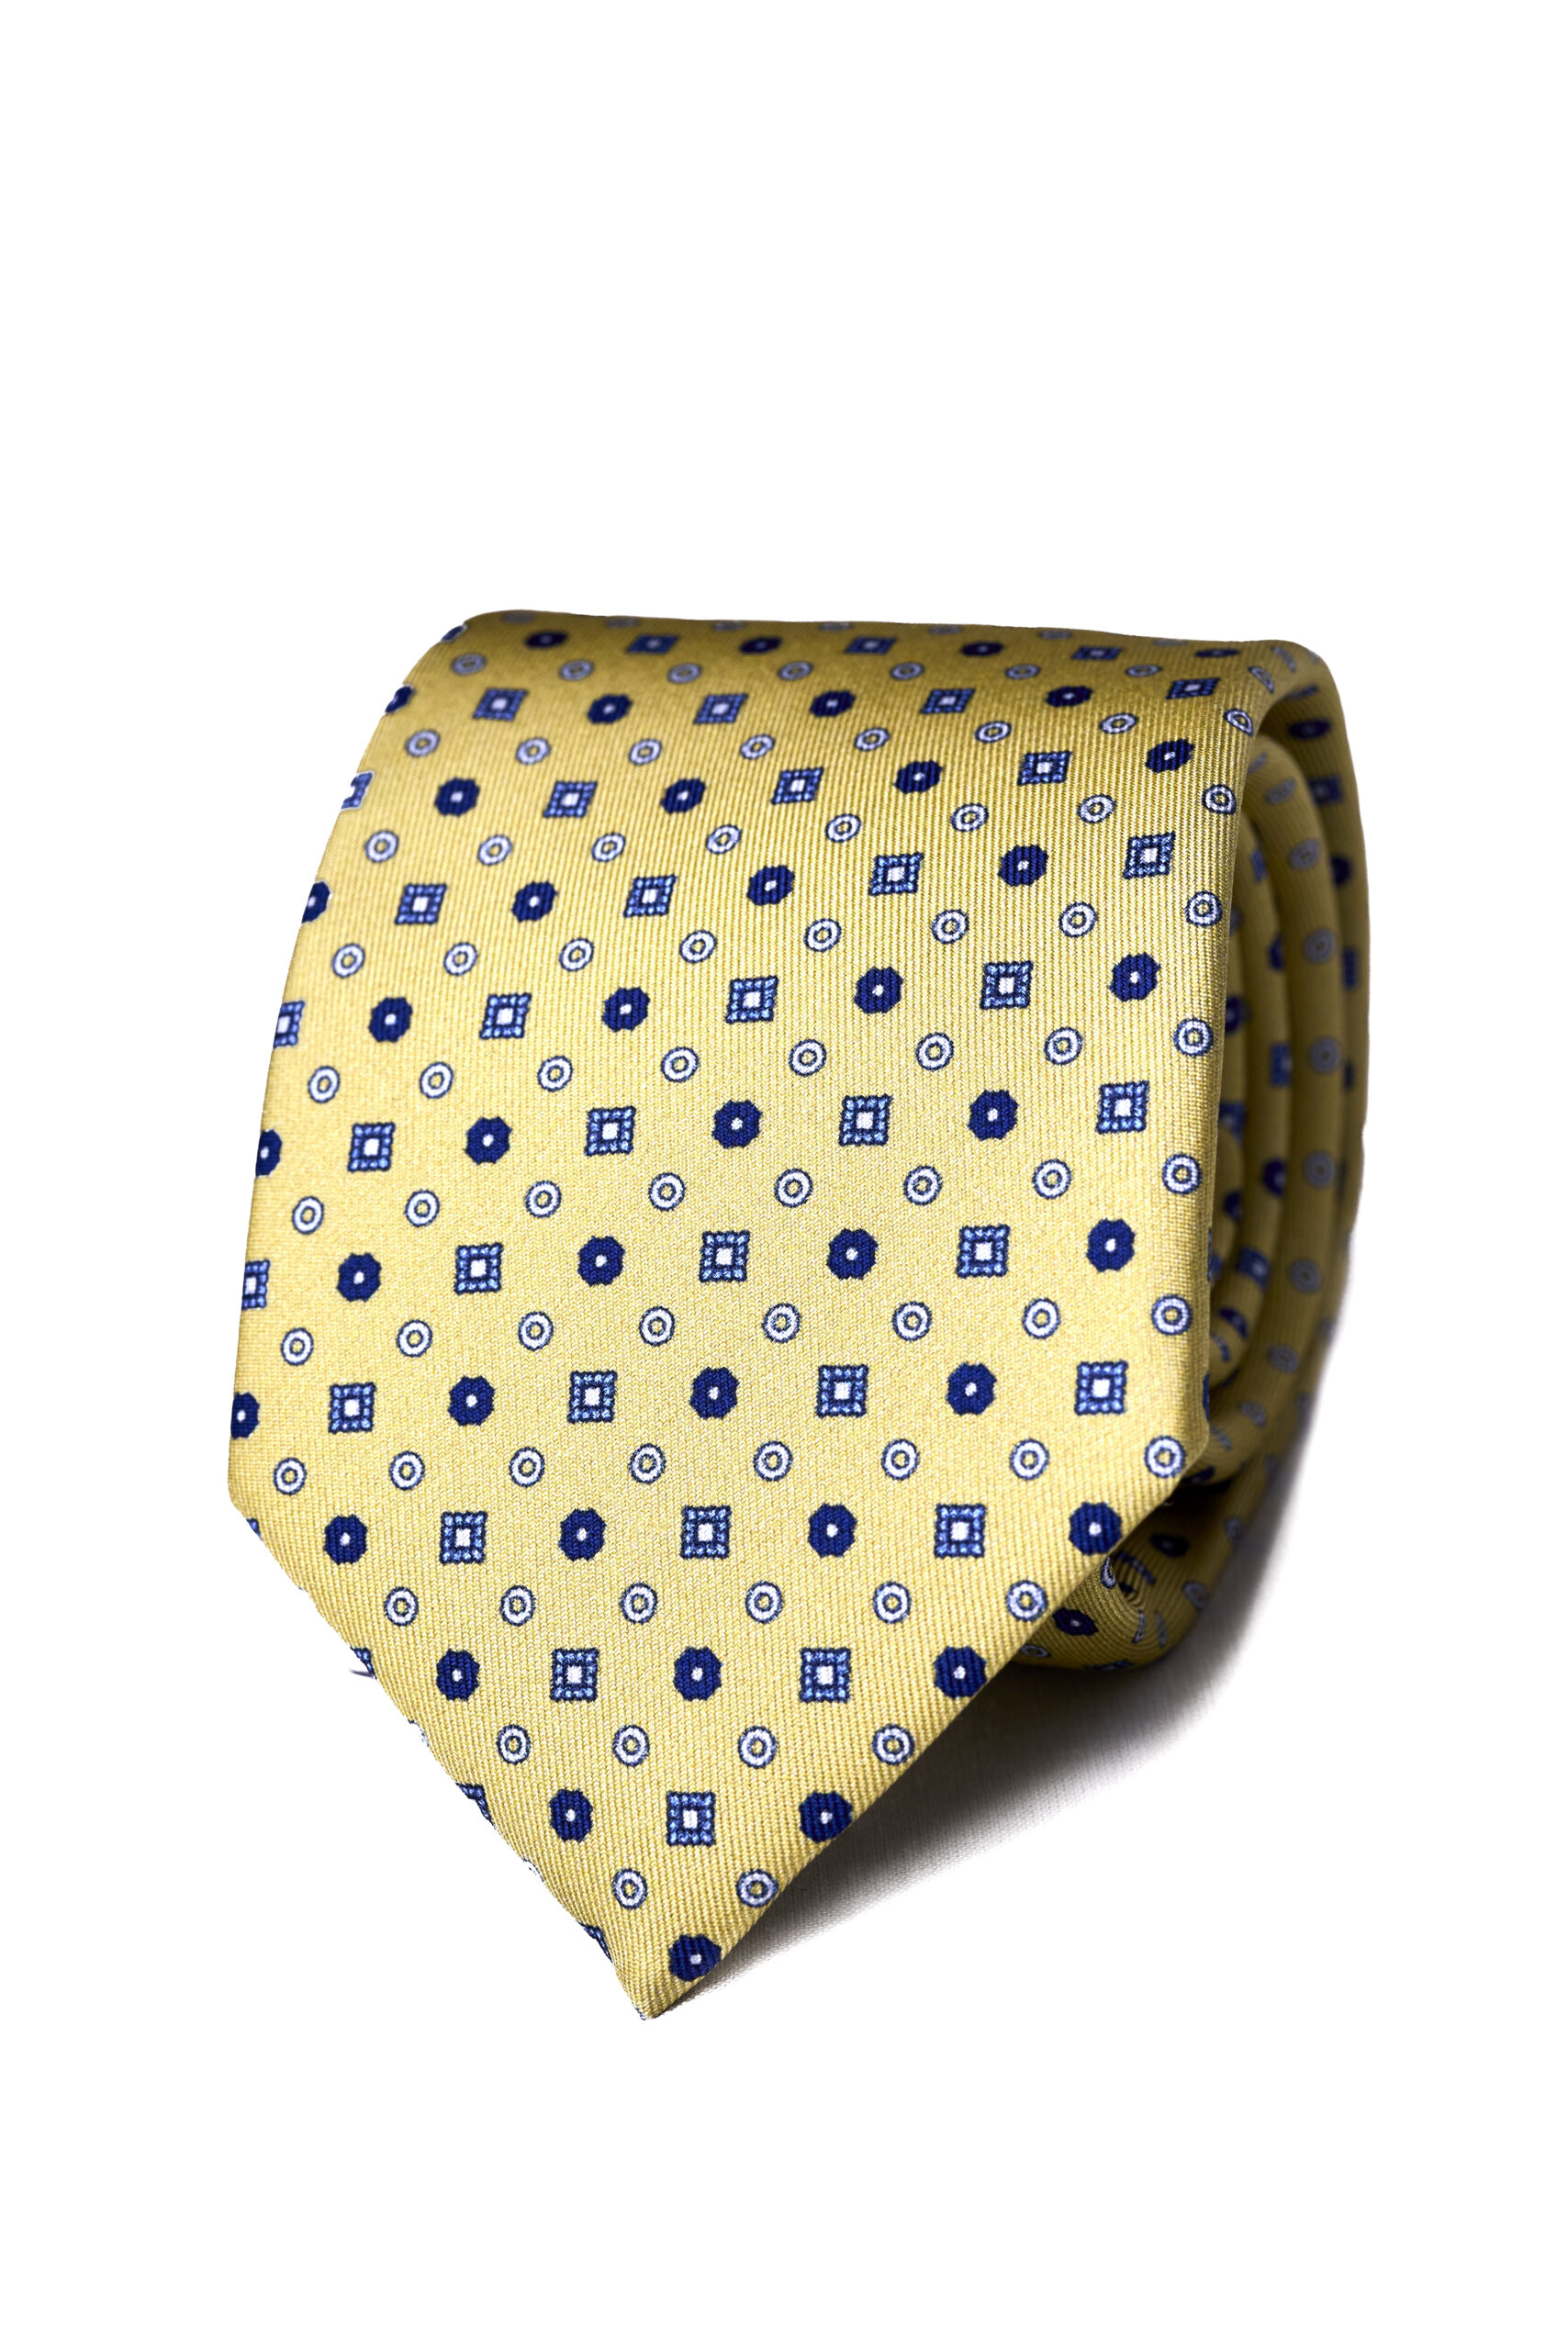 A yellow tie with blue and white squares on it